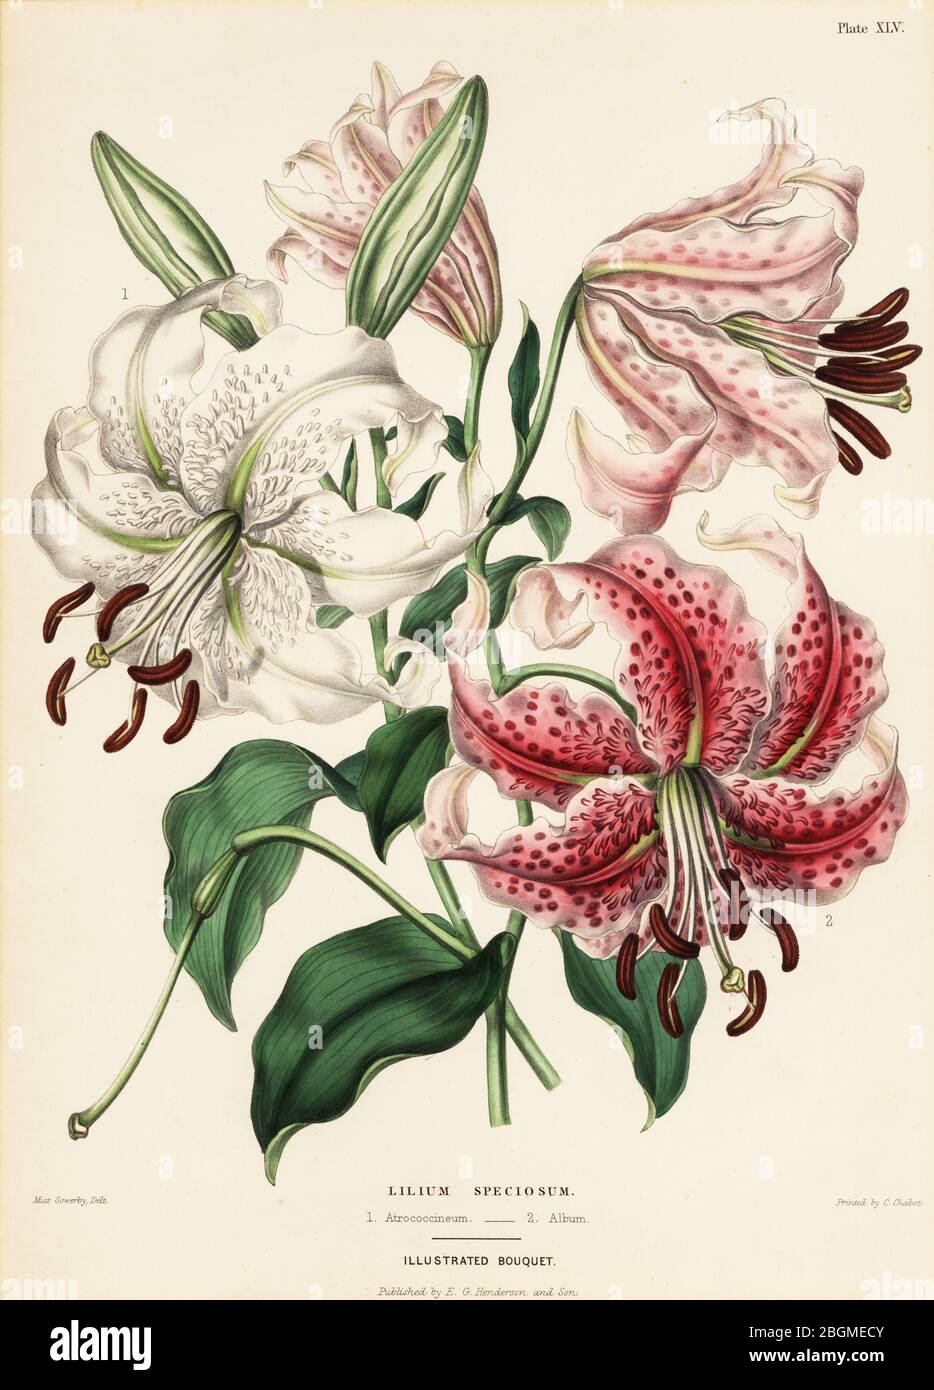 Japanese lily varieties, Lilium specioseum. Pink, Atrococcineum 1 and white, Album 2. Handcoloured copperplate engraving after a botanical illustration by Miss Charlotte Caroline Sowerby from Edward Henderson and Andrew Henderson’s The Illustrated Bouquet, consisting of figures with descriptions of new flowers, printed by C. Chabot, E.G. Henderon, London, 1857. Stock Photo